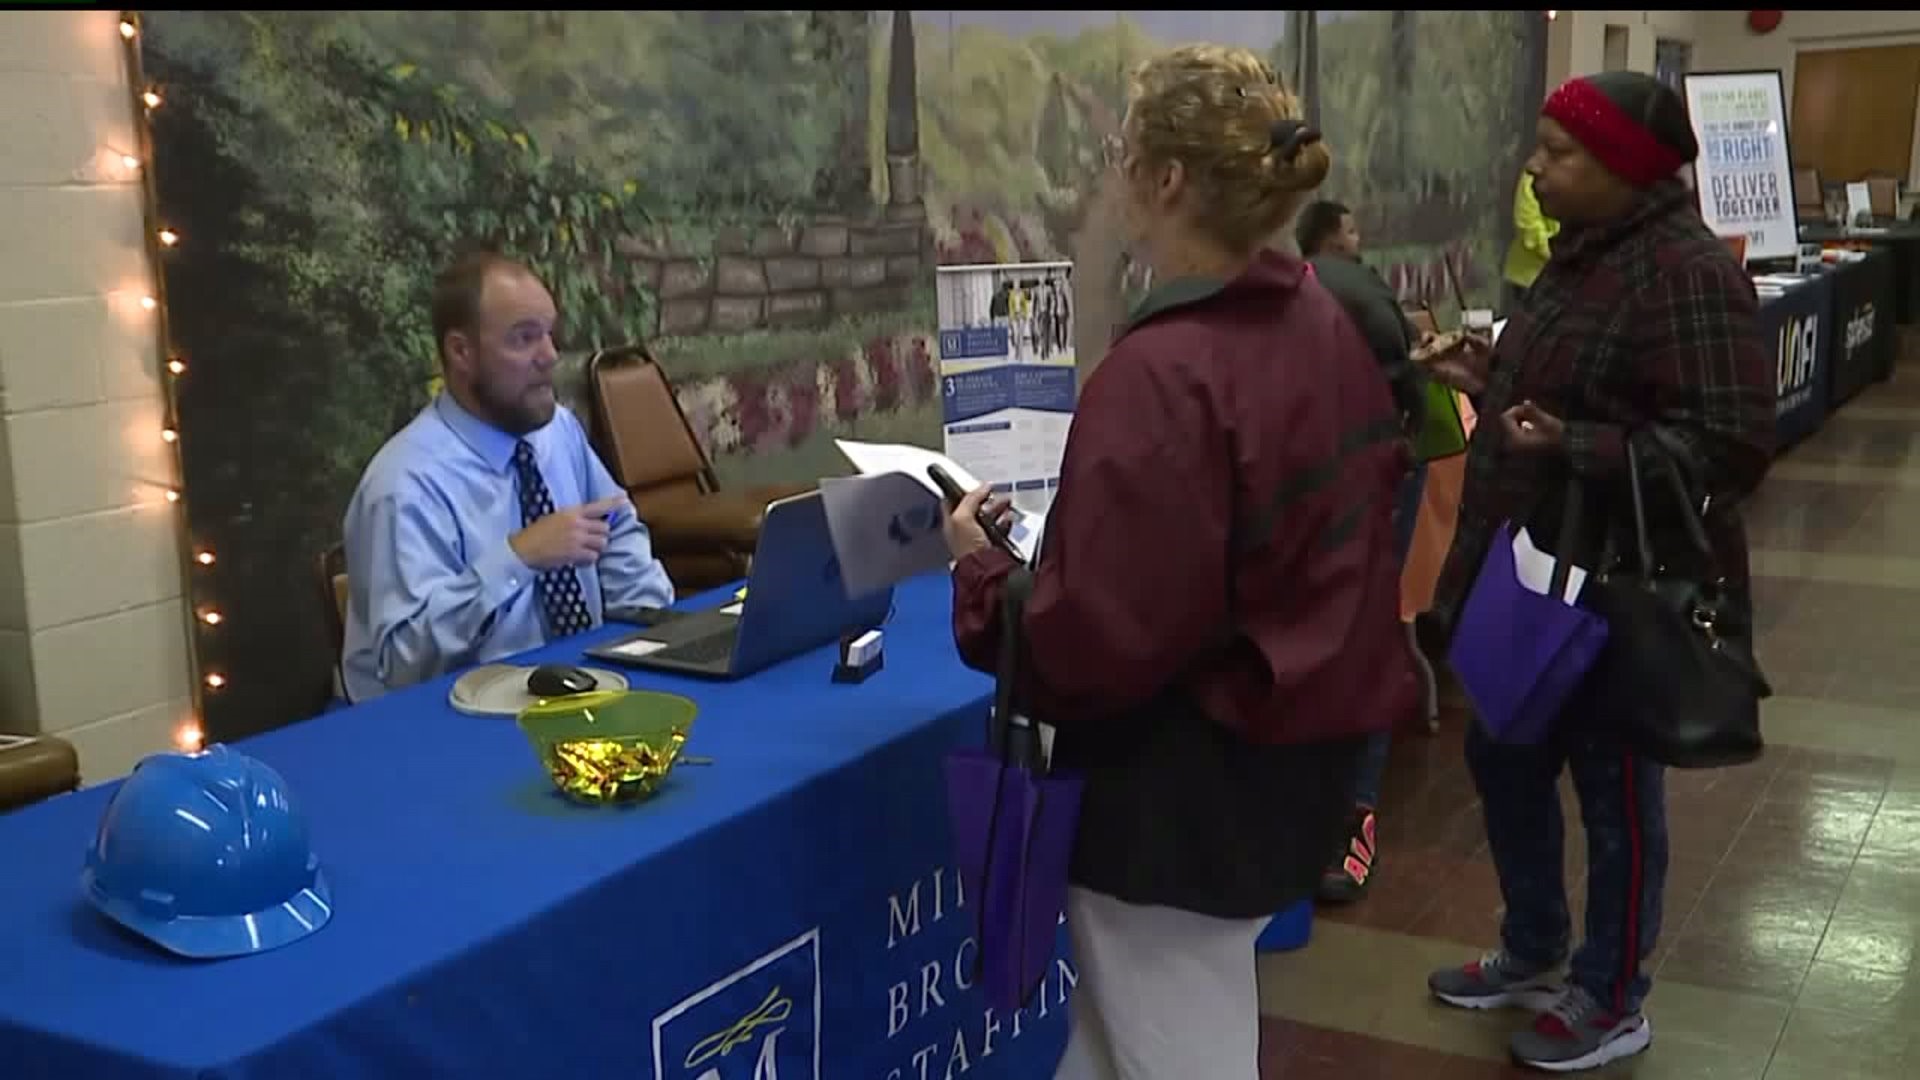 Job Fair Gives People a Second Chance